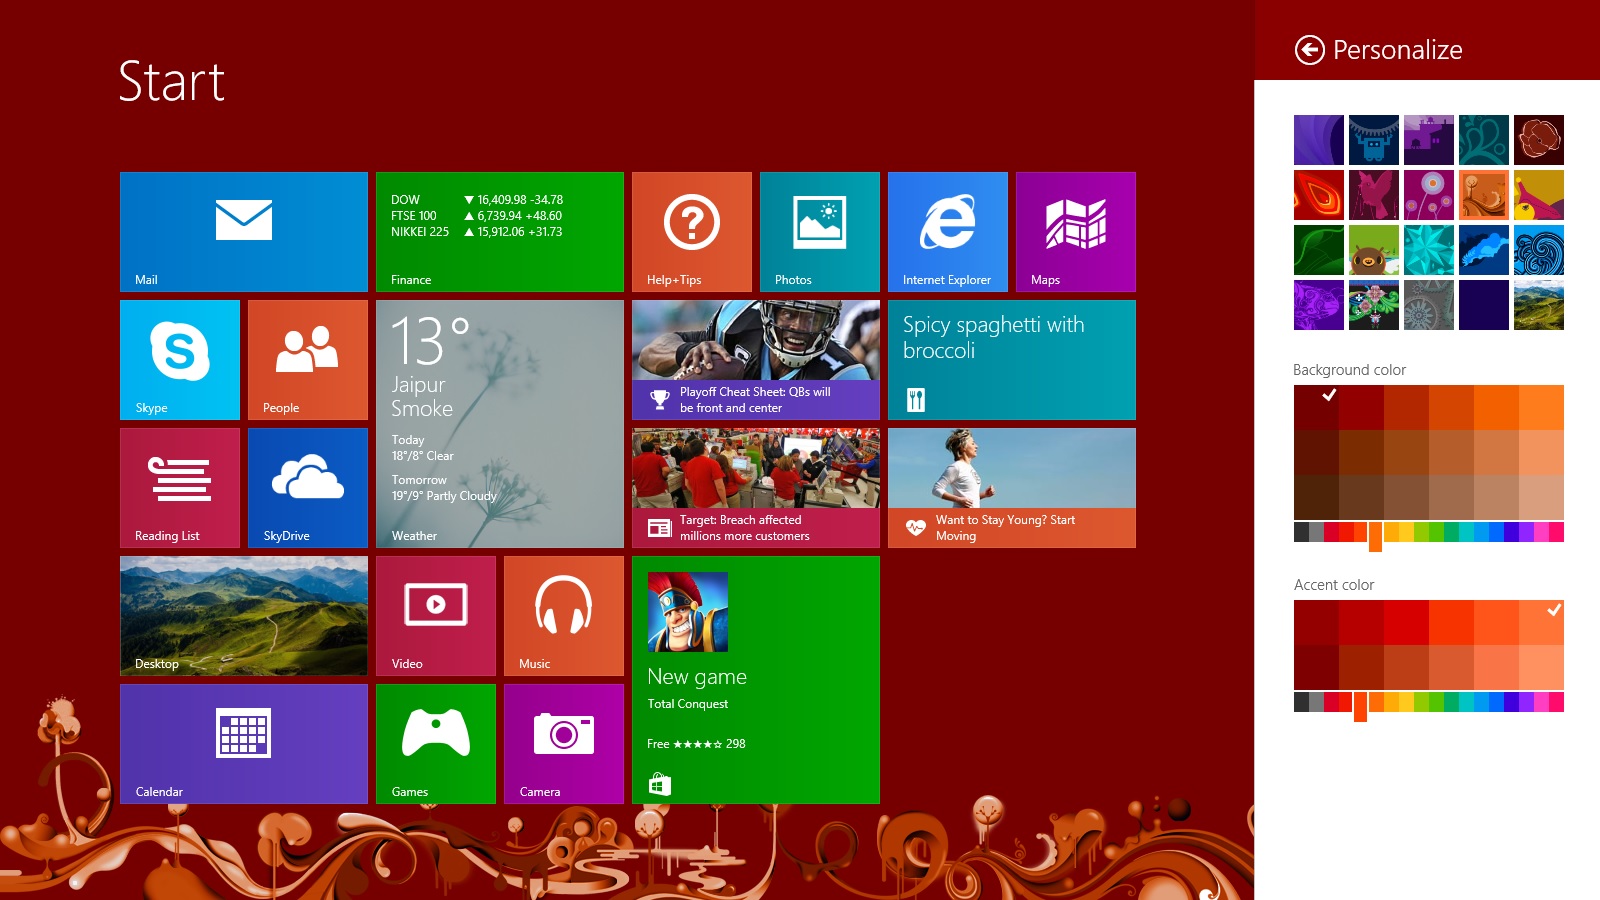 Windows 81 New Features How Windows 81 is different from Windows 8